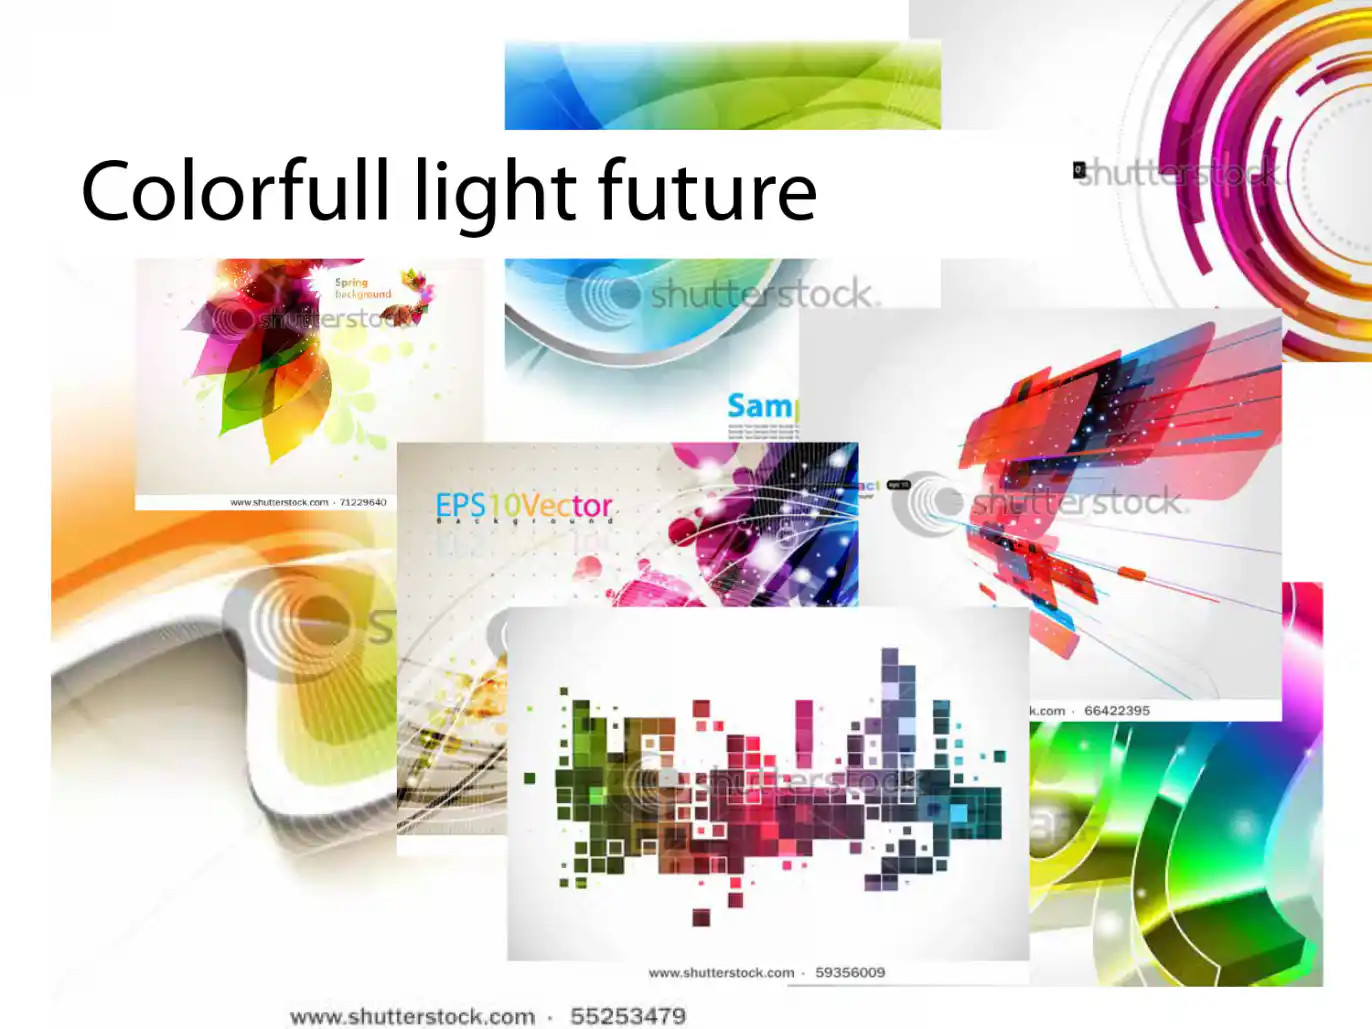 image showing colorful light future images